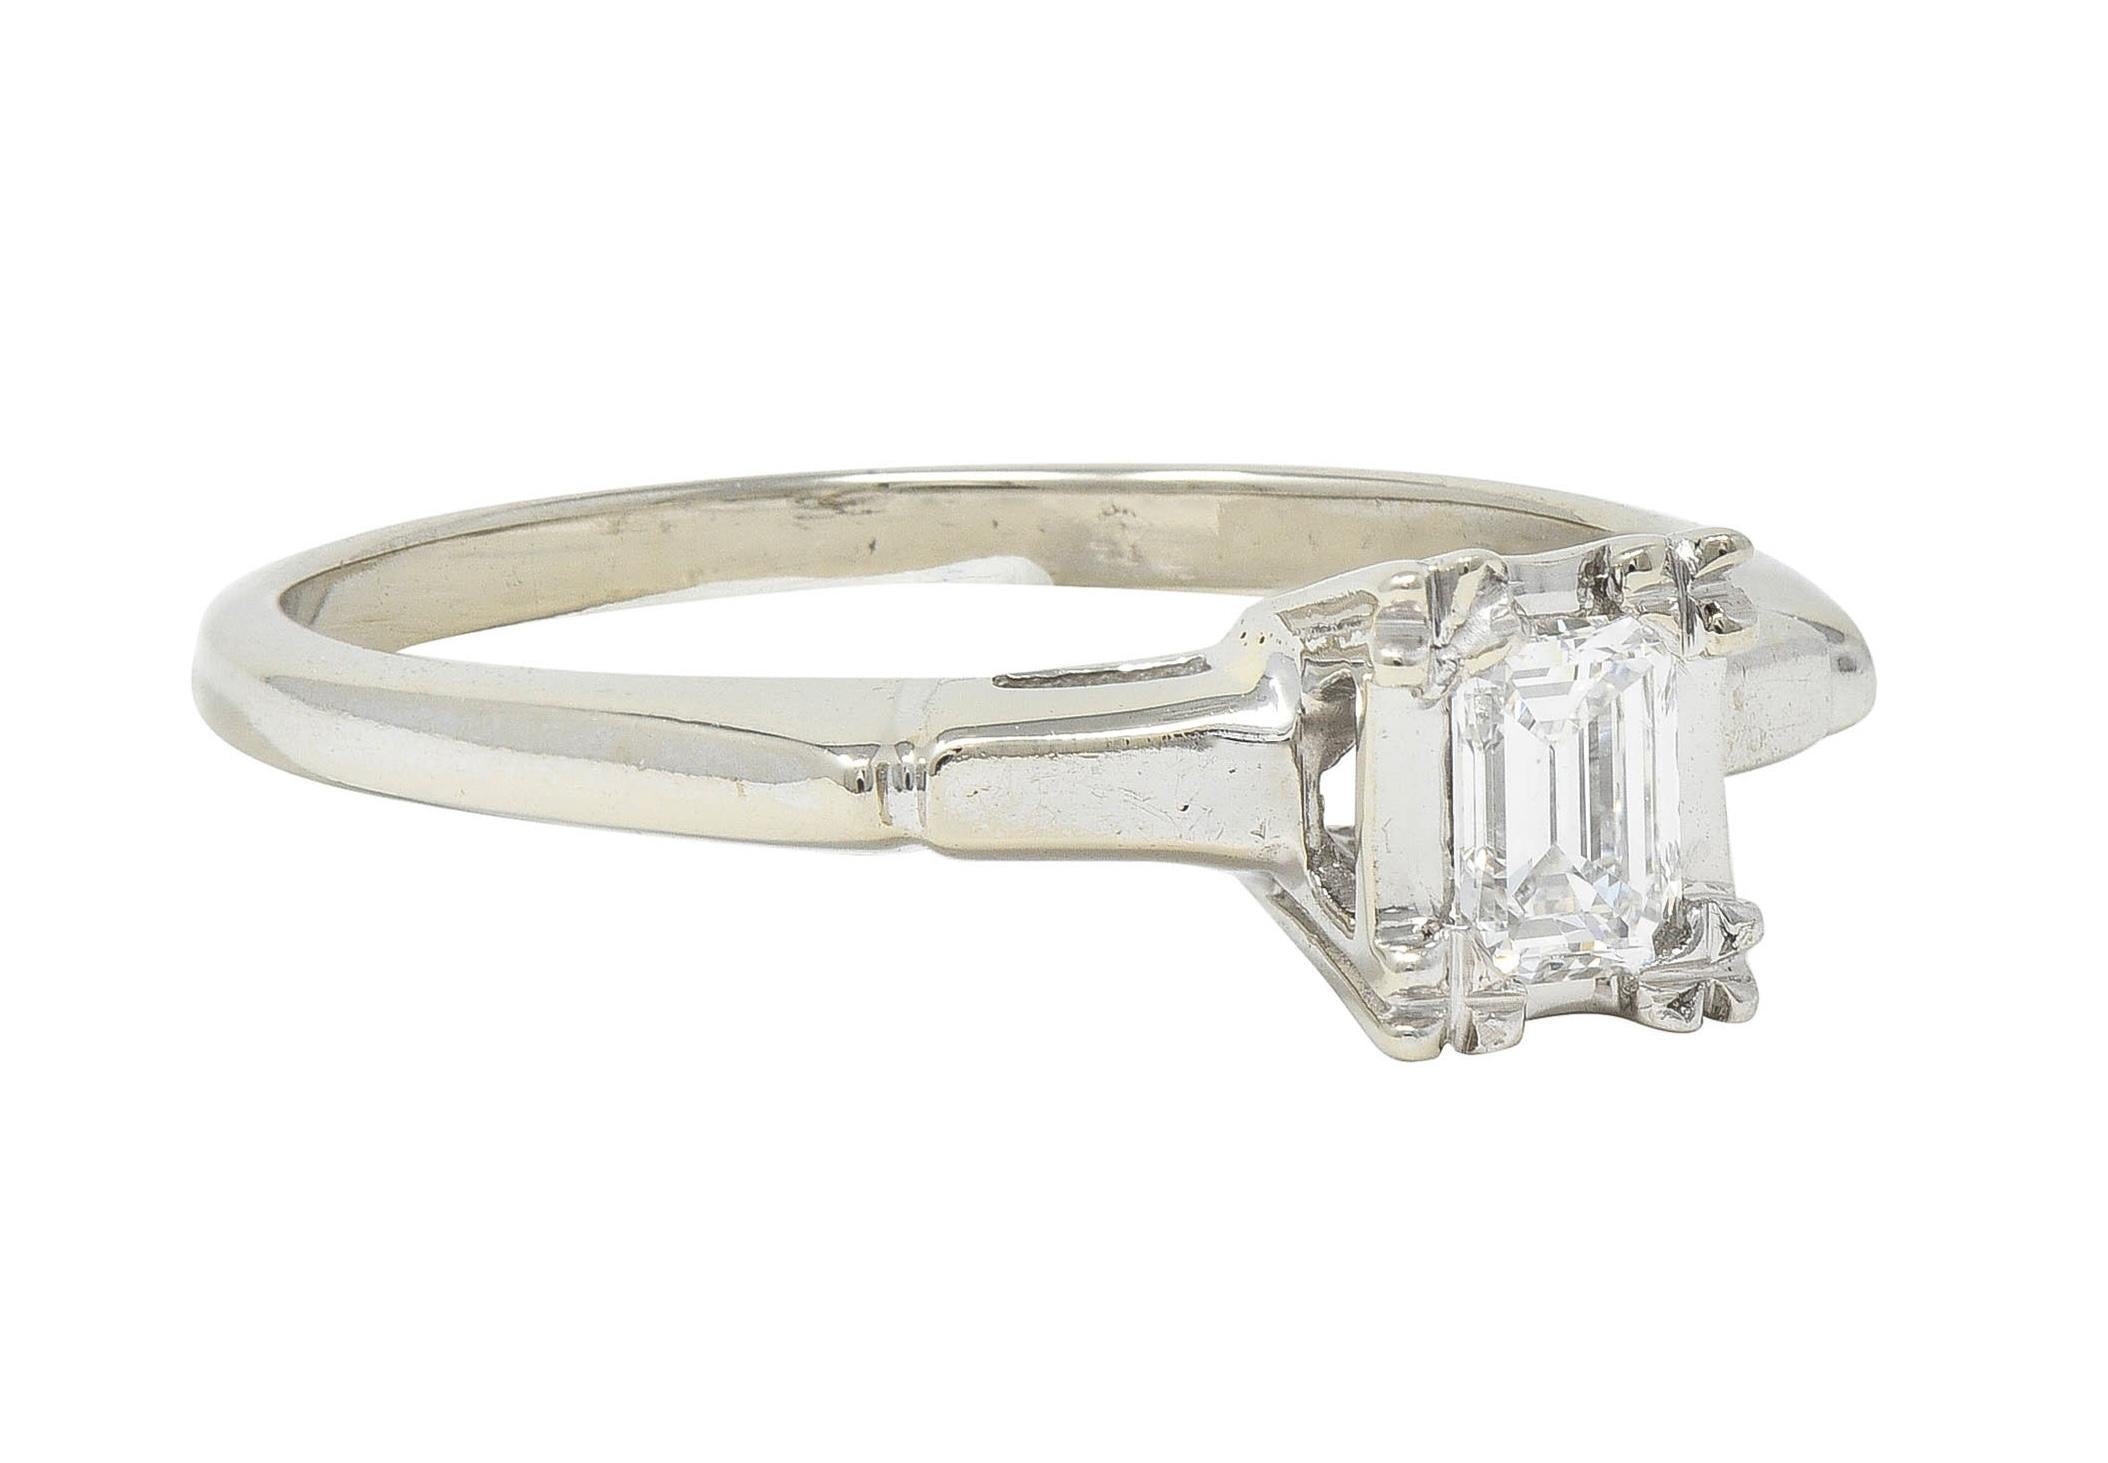 Centering an emerald cut diamond weighing approximately 0.25 carat total 
G color with VS2 clarity - flush set with tri beads in basket
With a pierced arch motif profile and cathedral shoulders
With grooved detail and high polish finish 
Stamped for